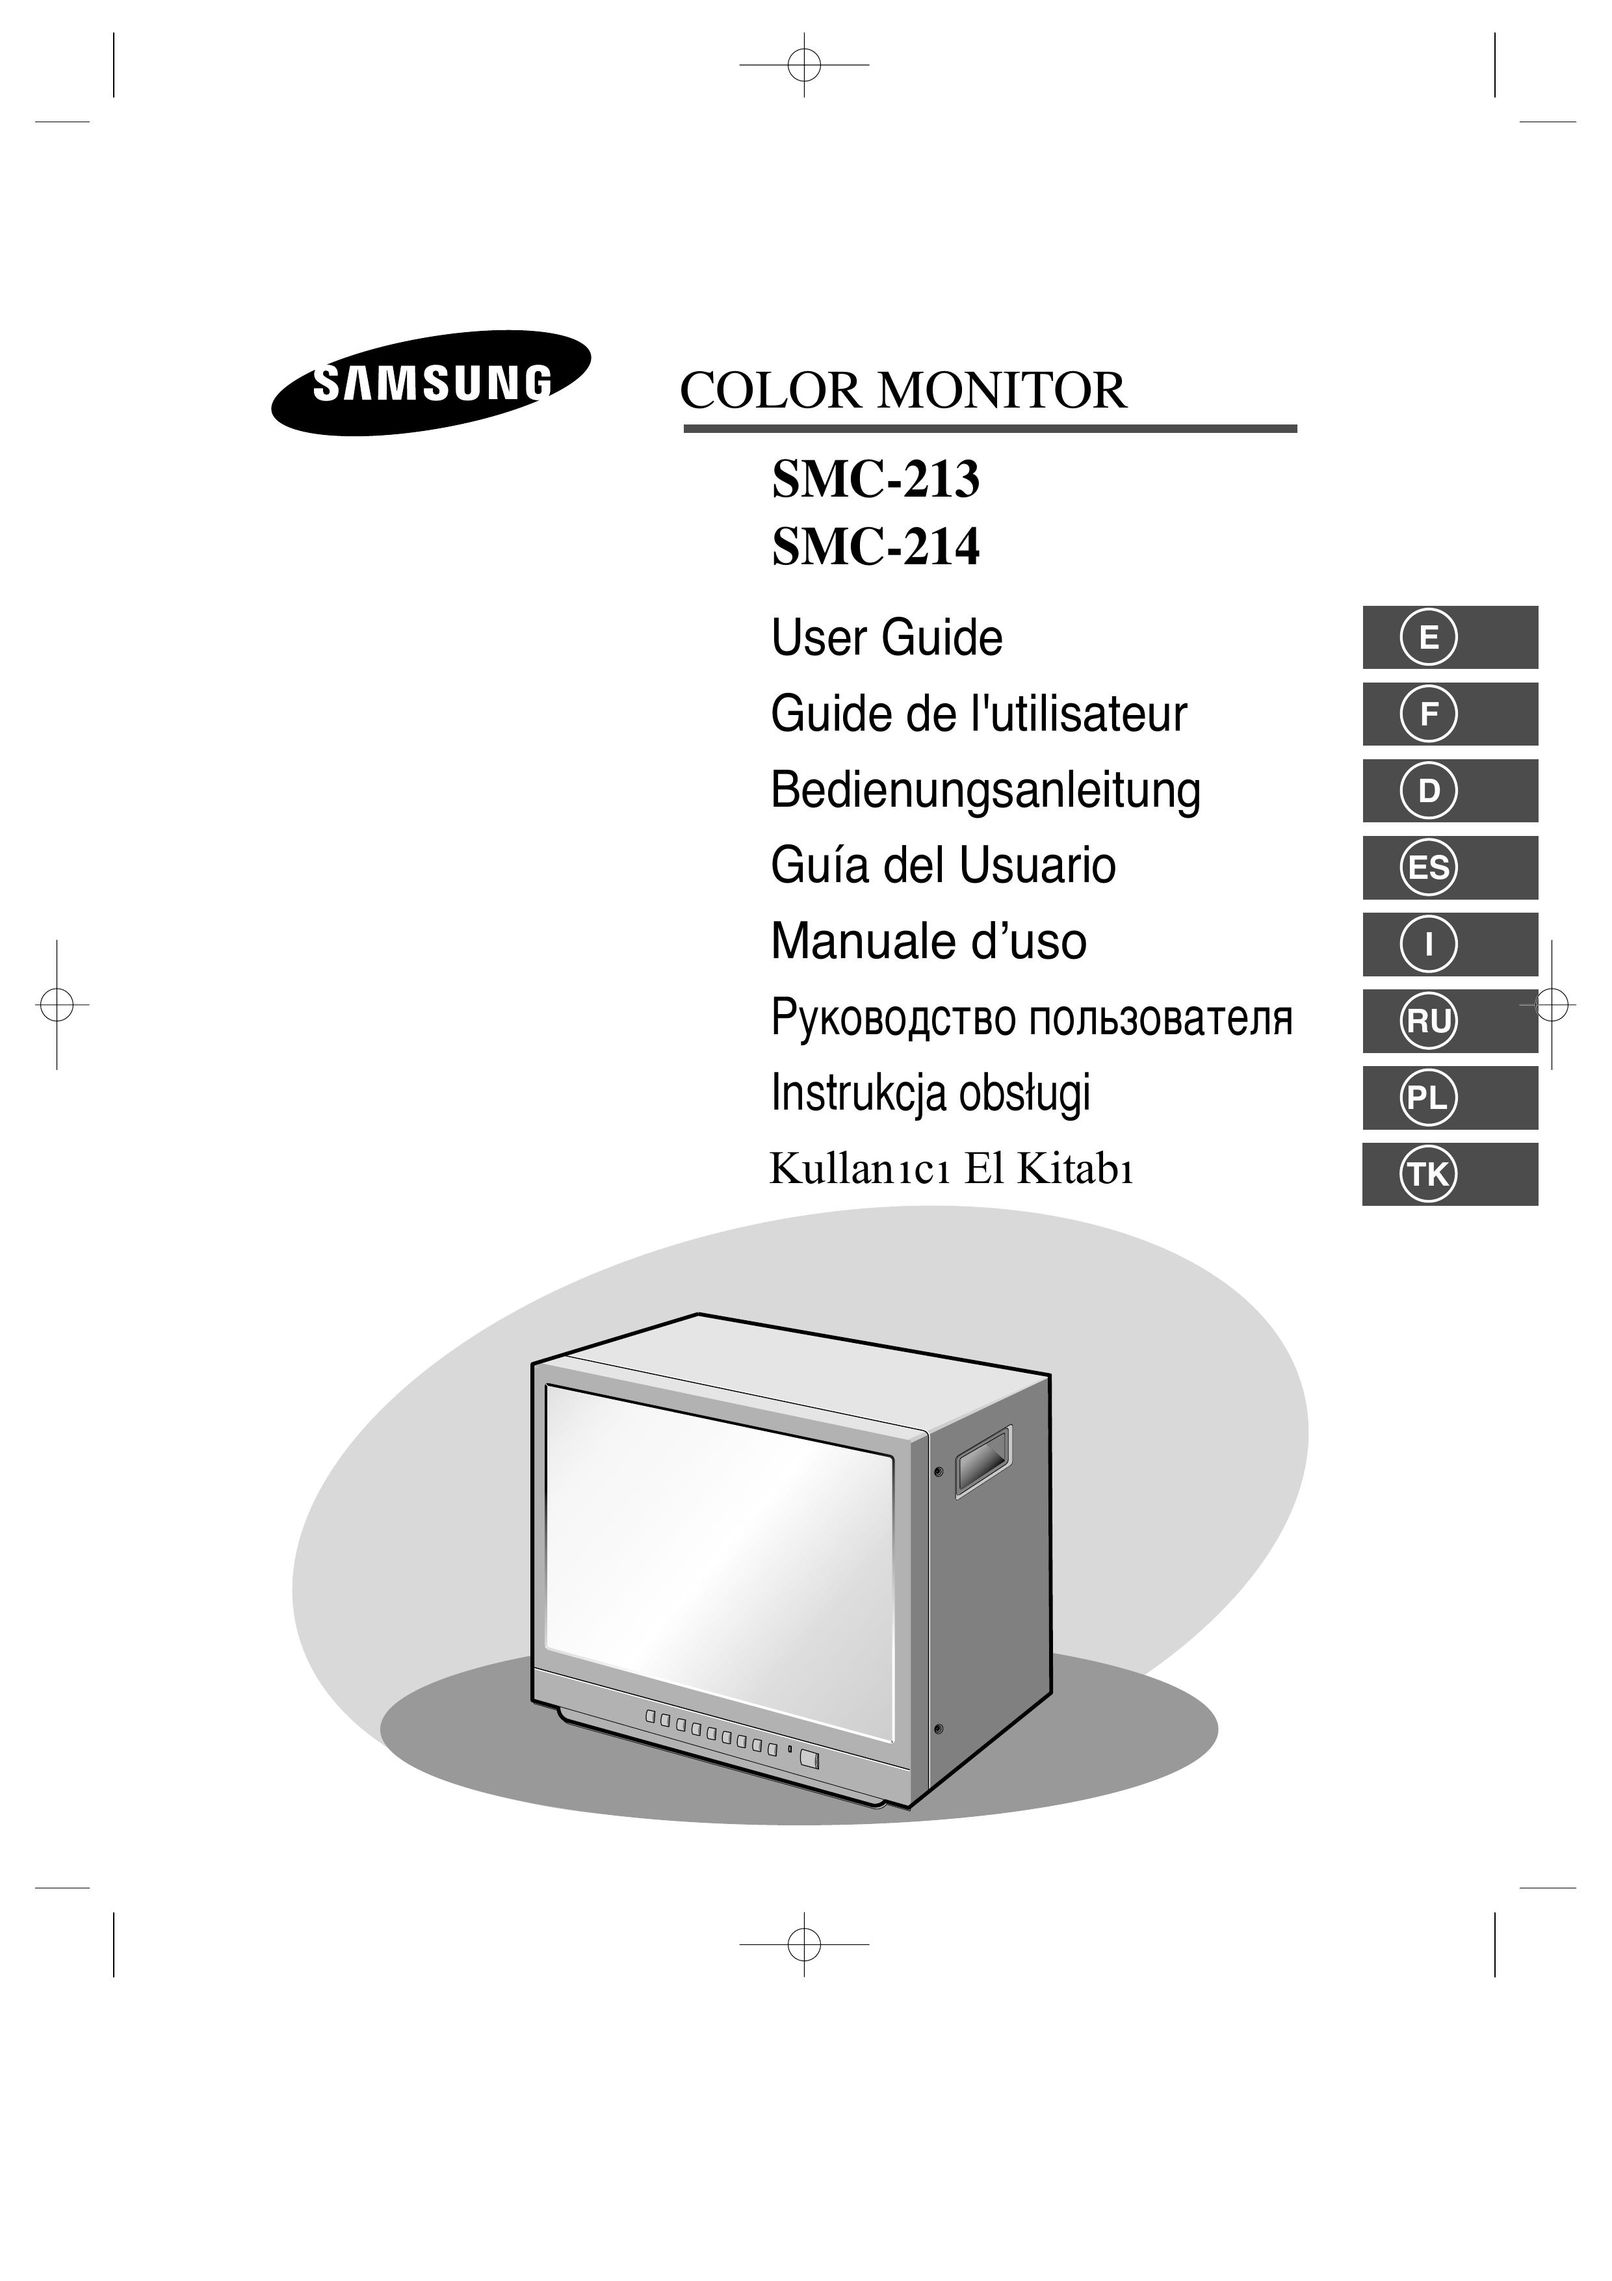 Samsung SMC-213 Home Security System User Manual